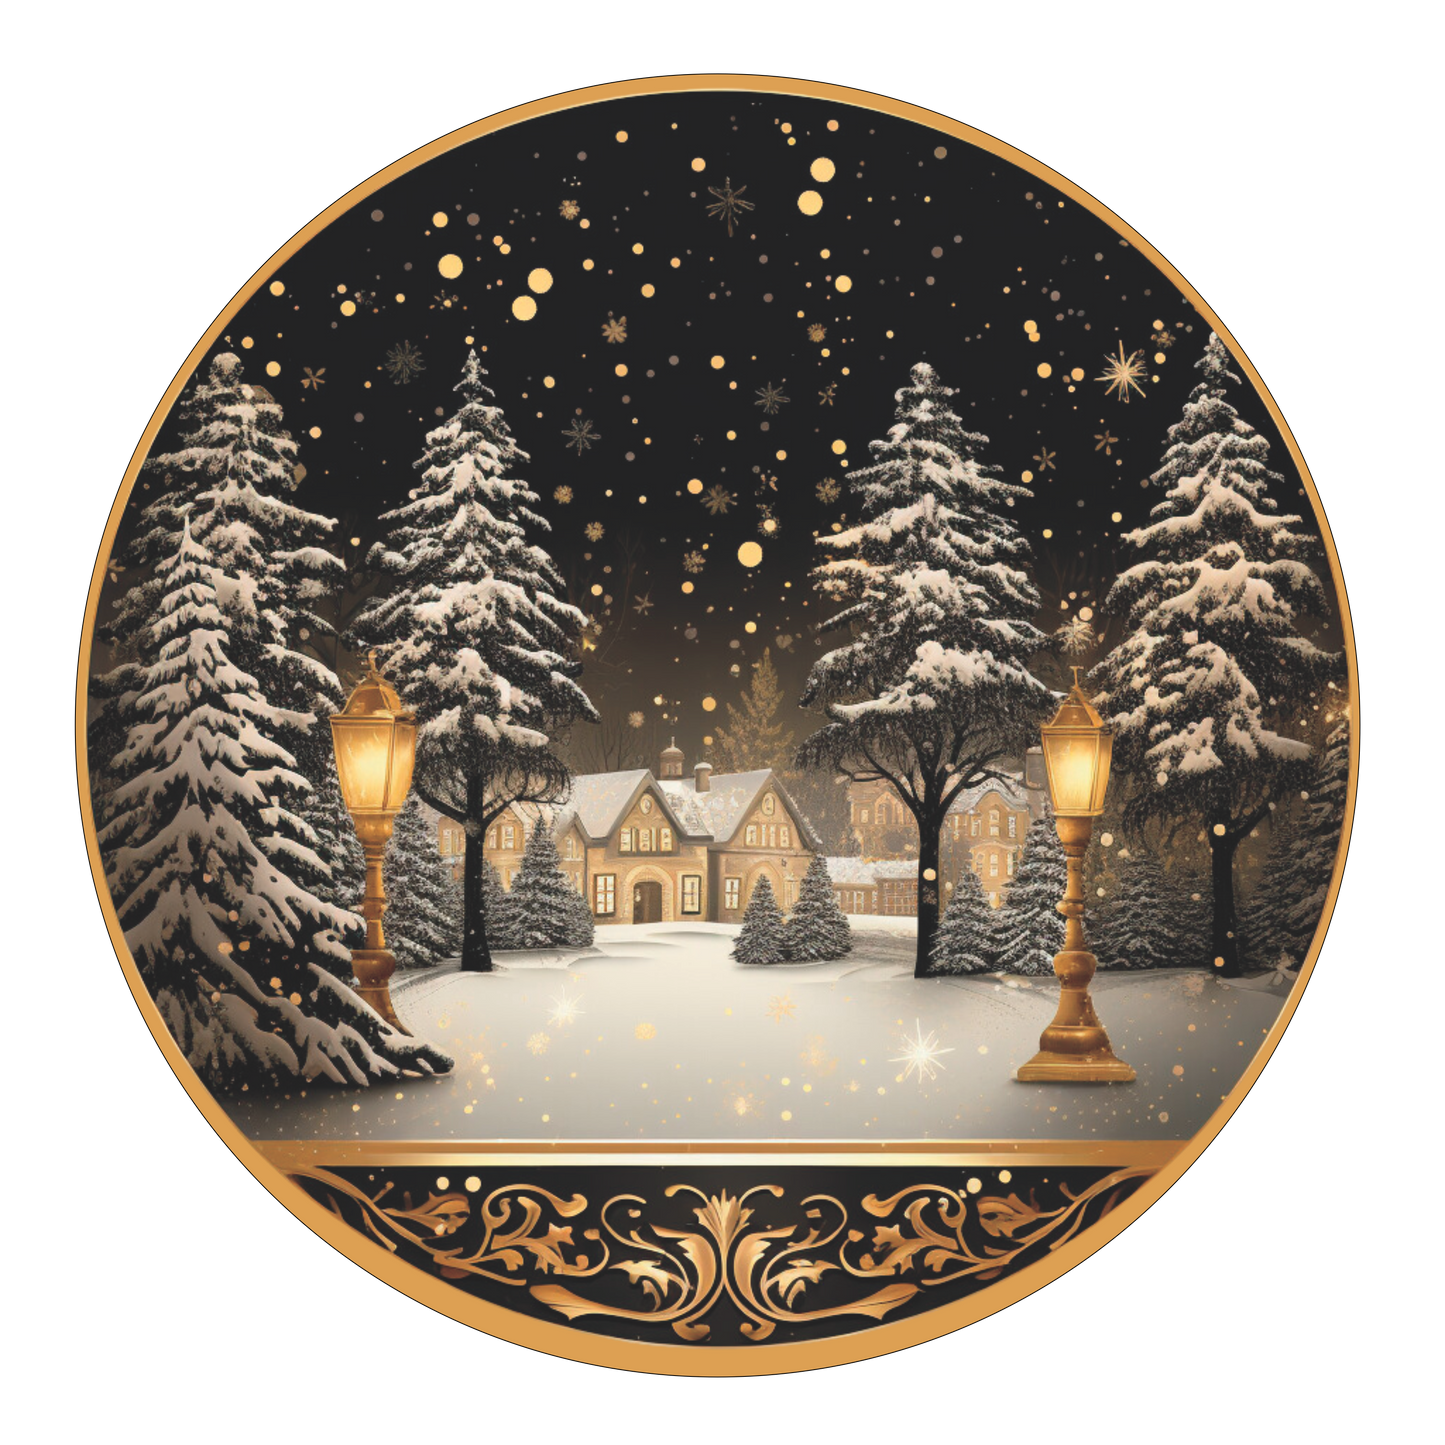 House in Snow with golden lanterns in black and gold wreath Sign Round